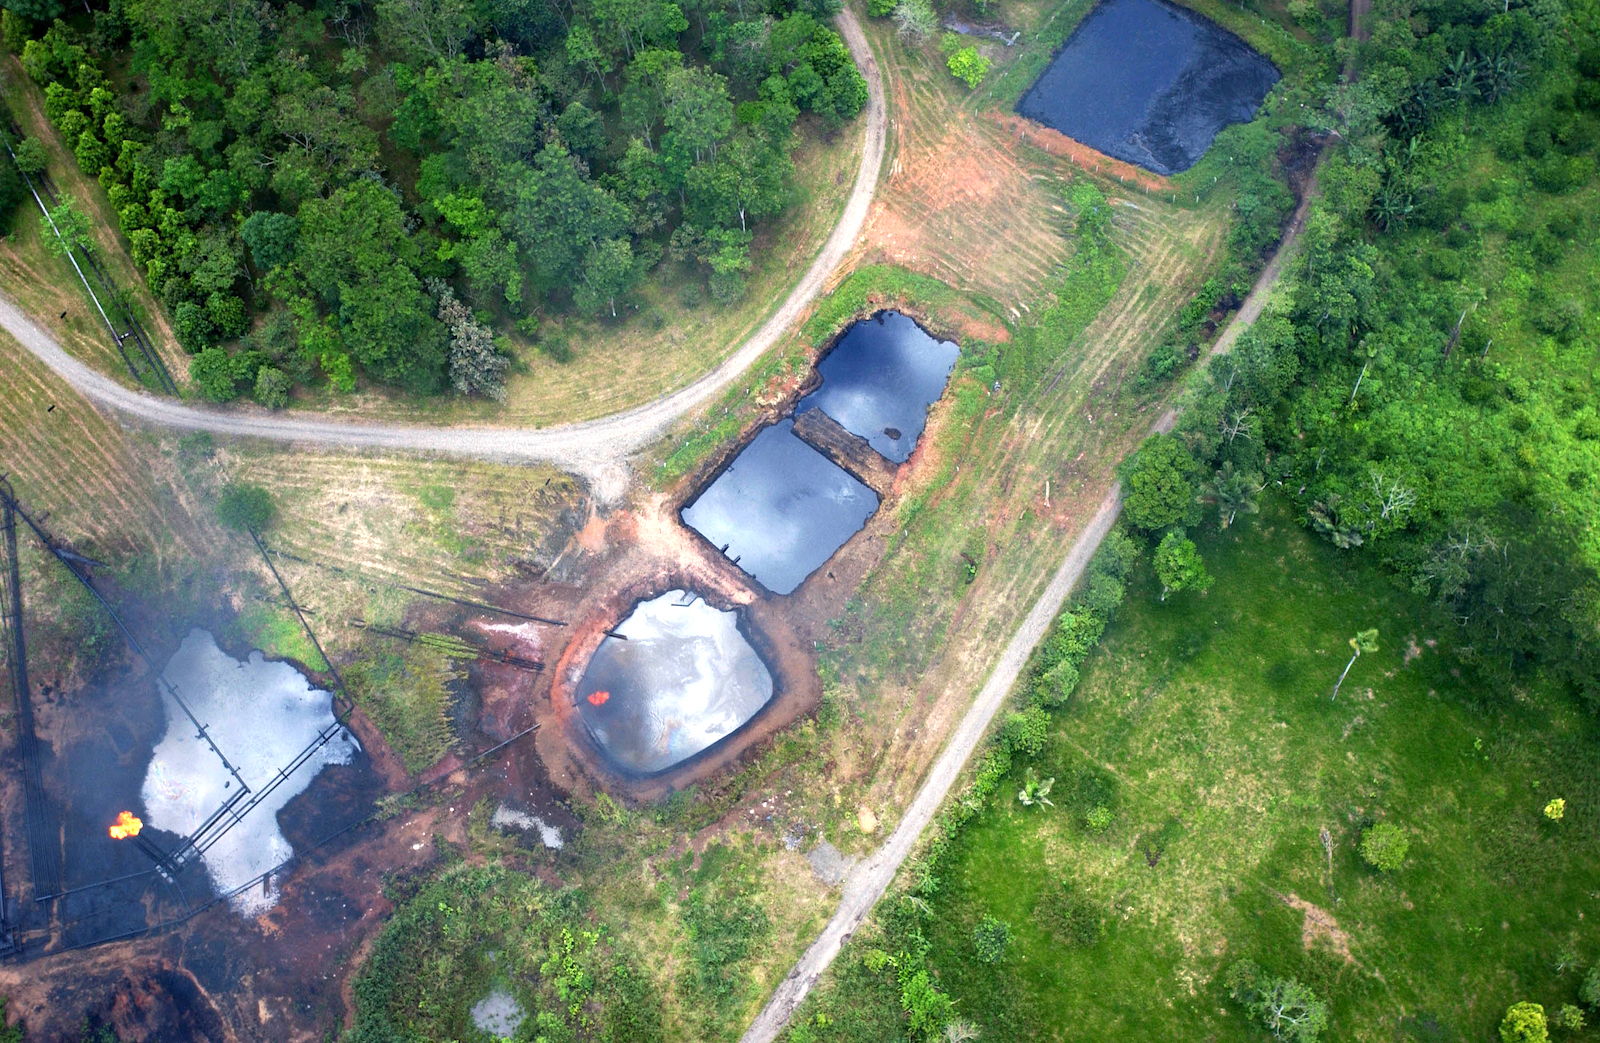 large oil slick pools amid forest as seen from an aerial view